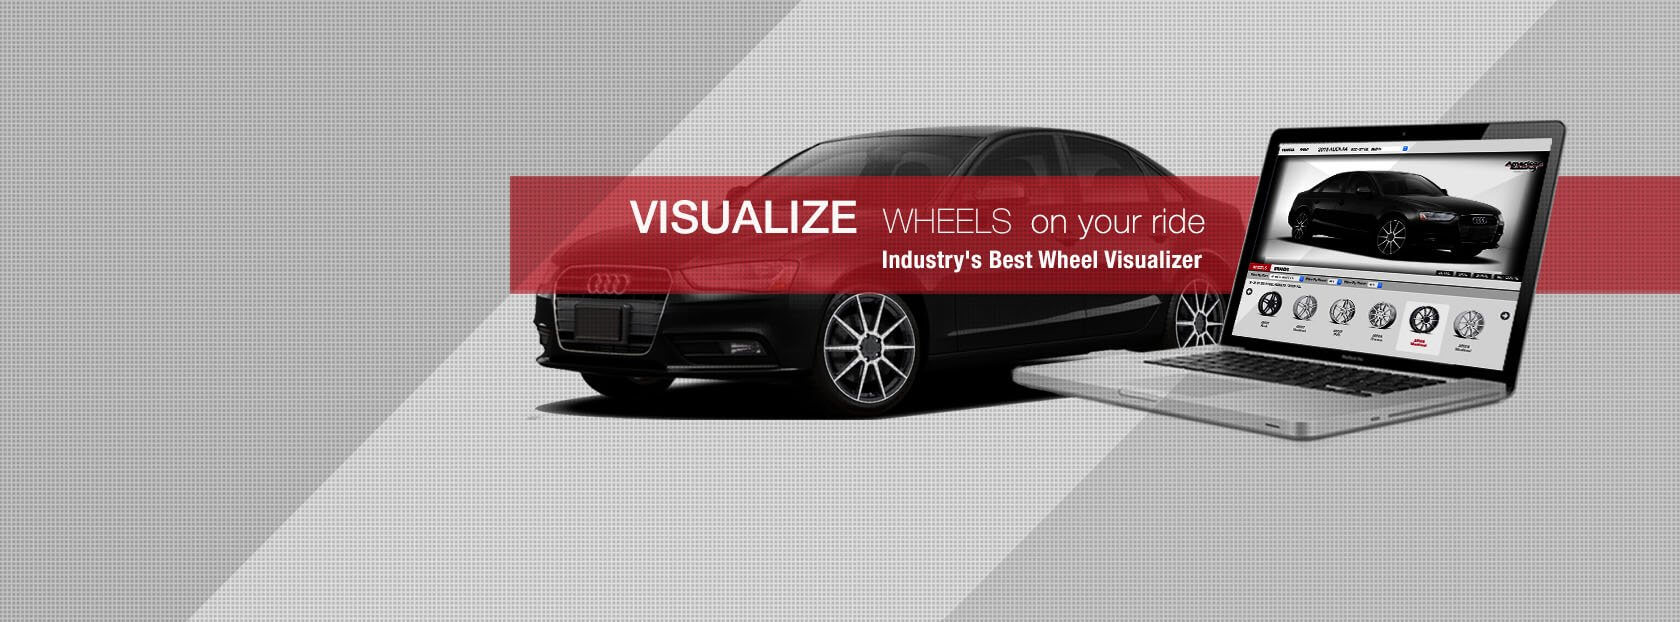 https://canadawheels.ca/wheel-visualizer.php